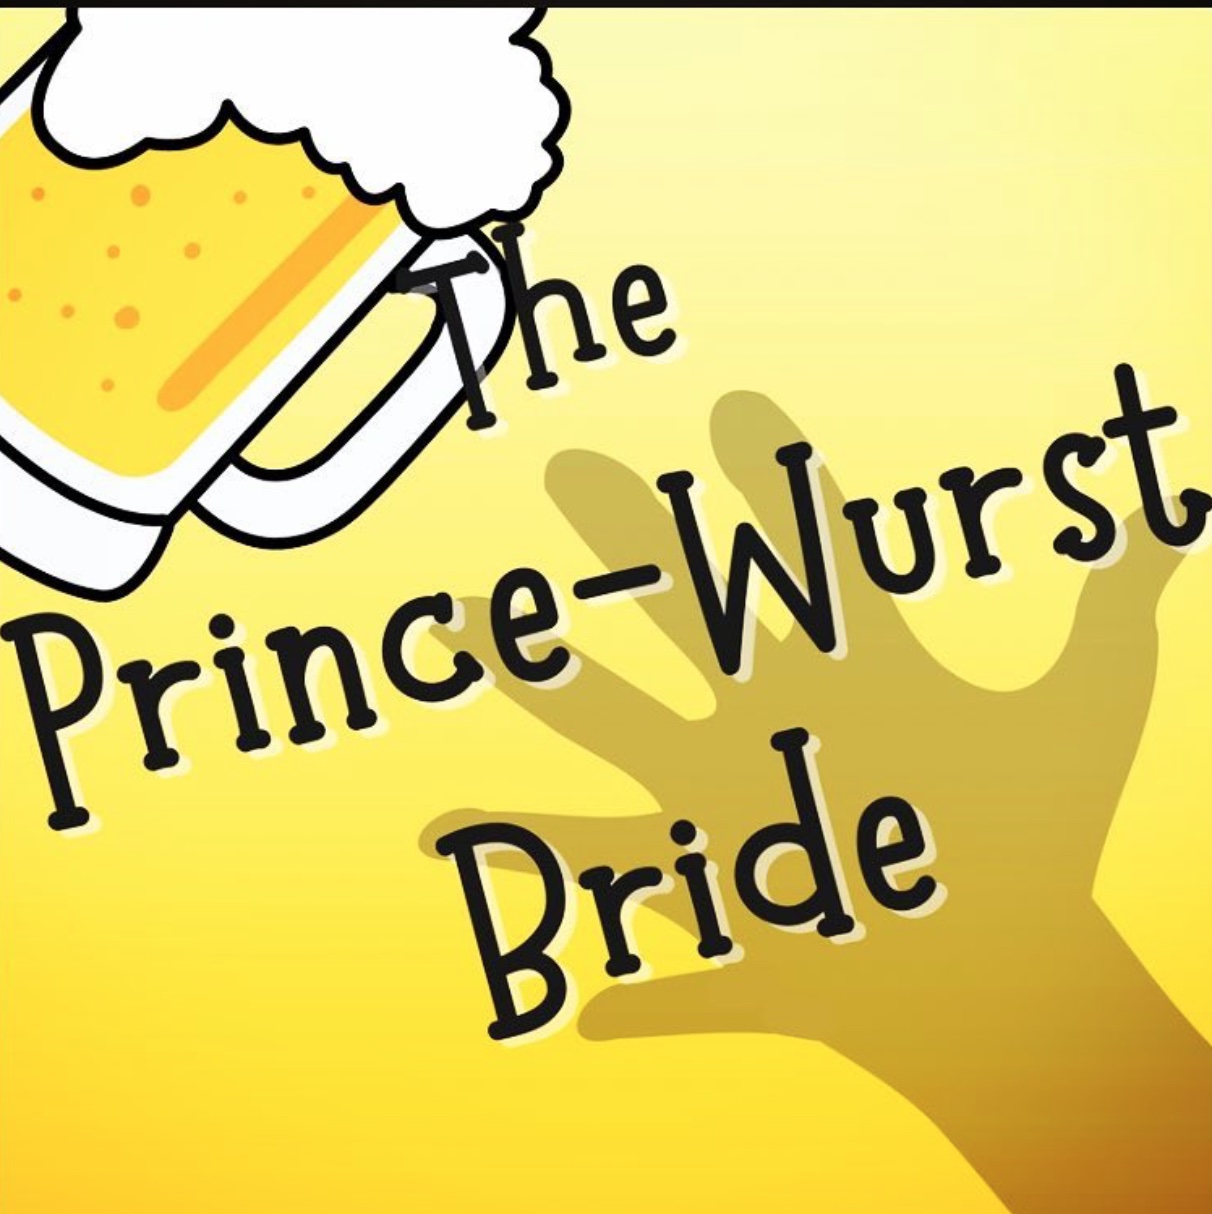 The Prince-Wurst Bride by Circle Arts Theatre